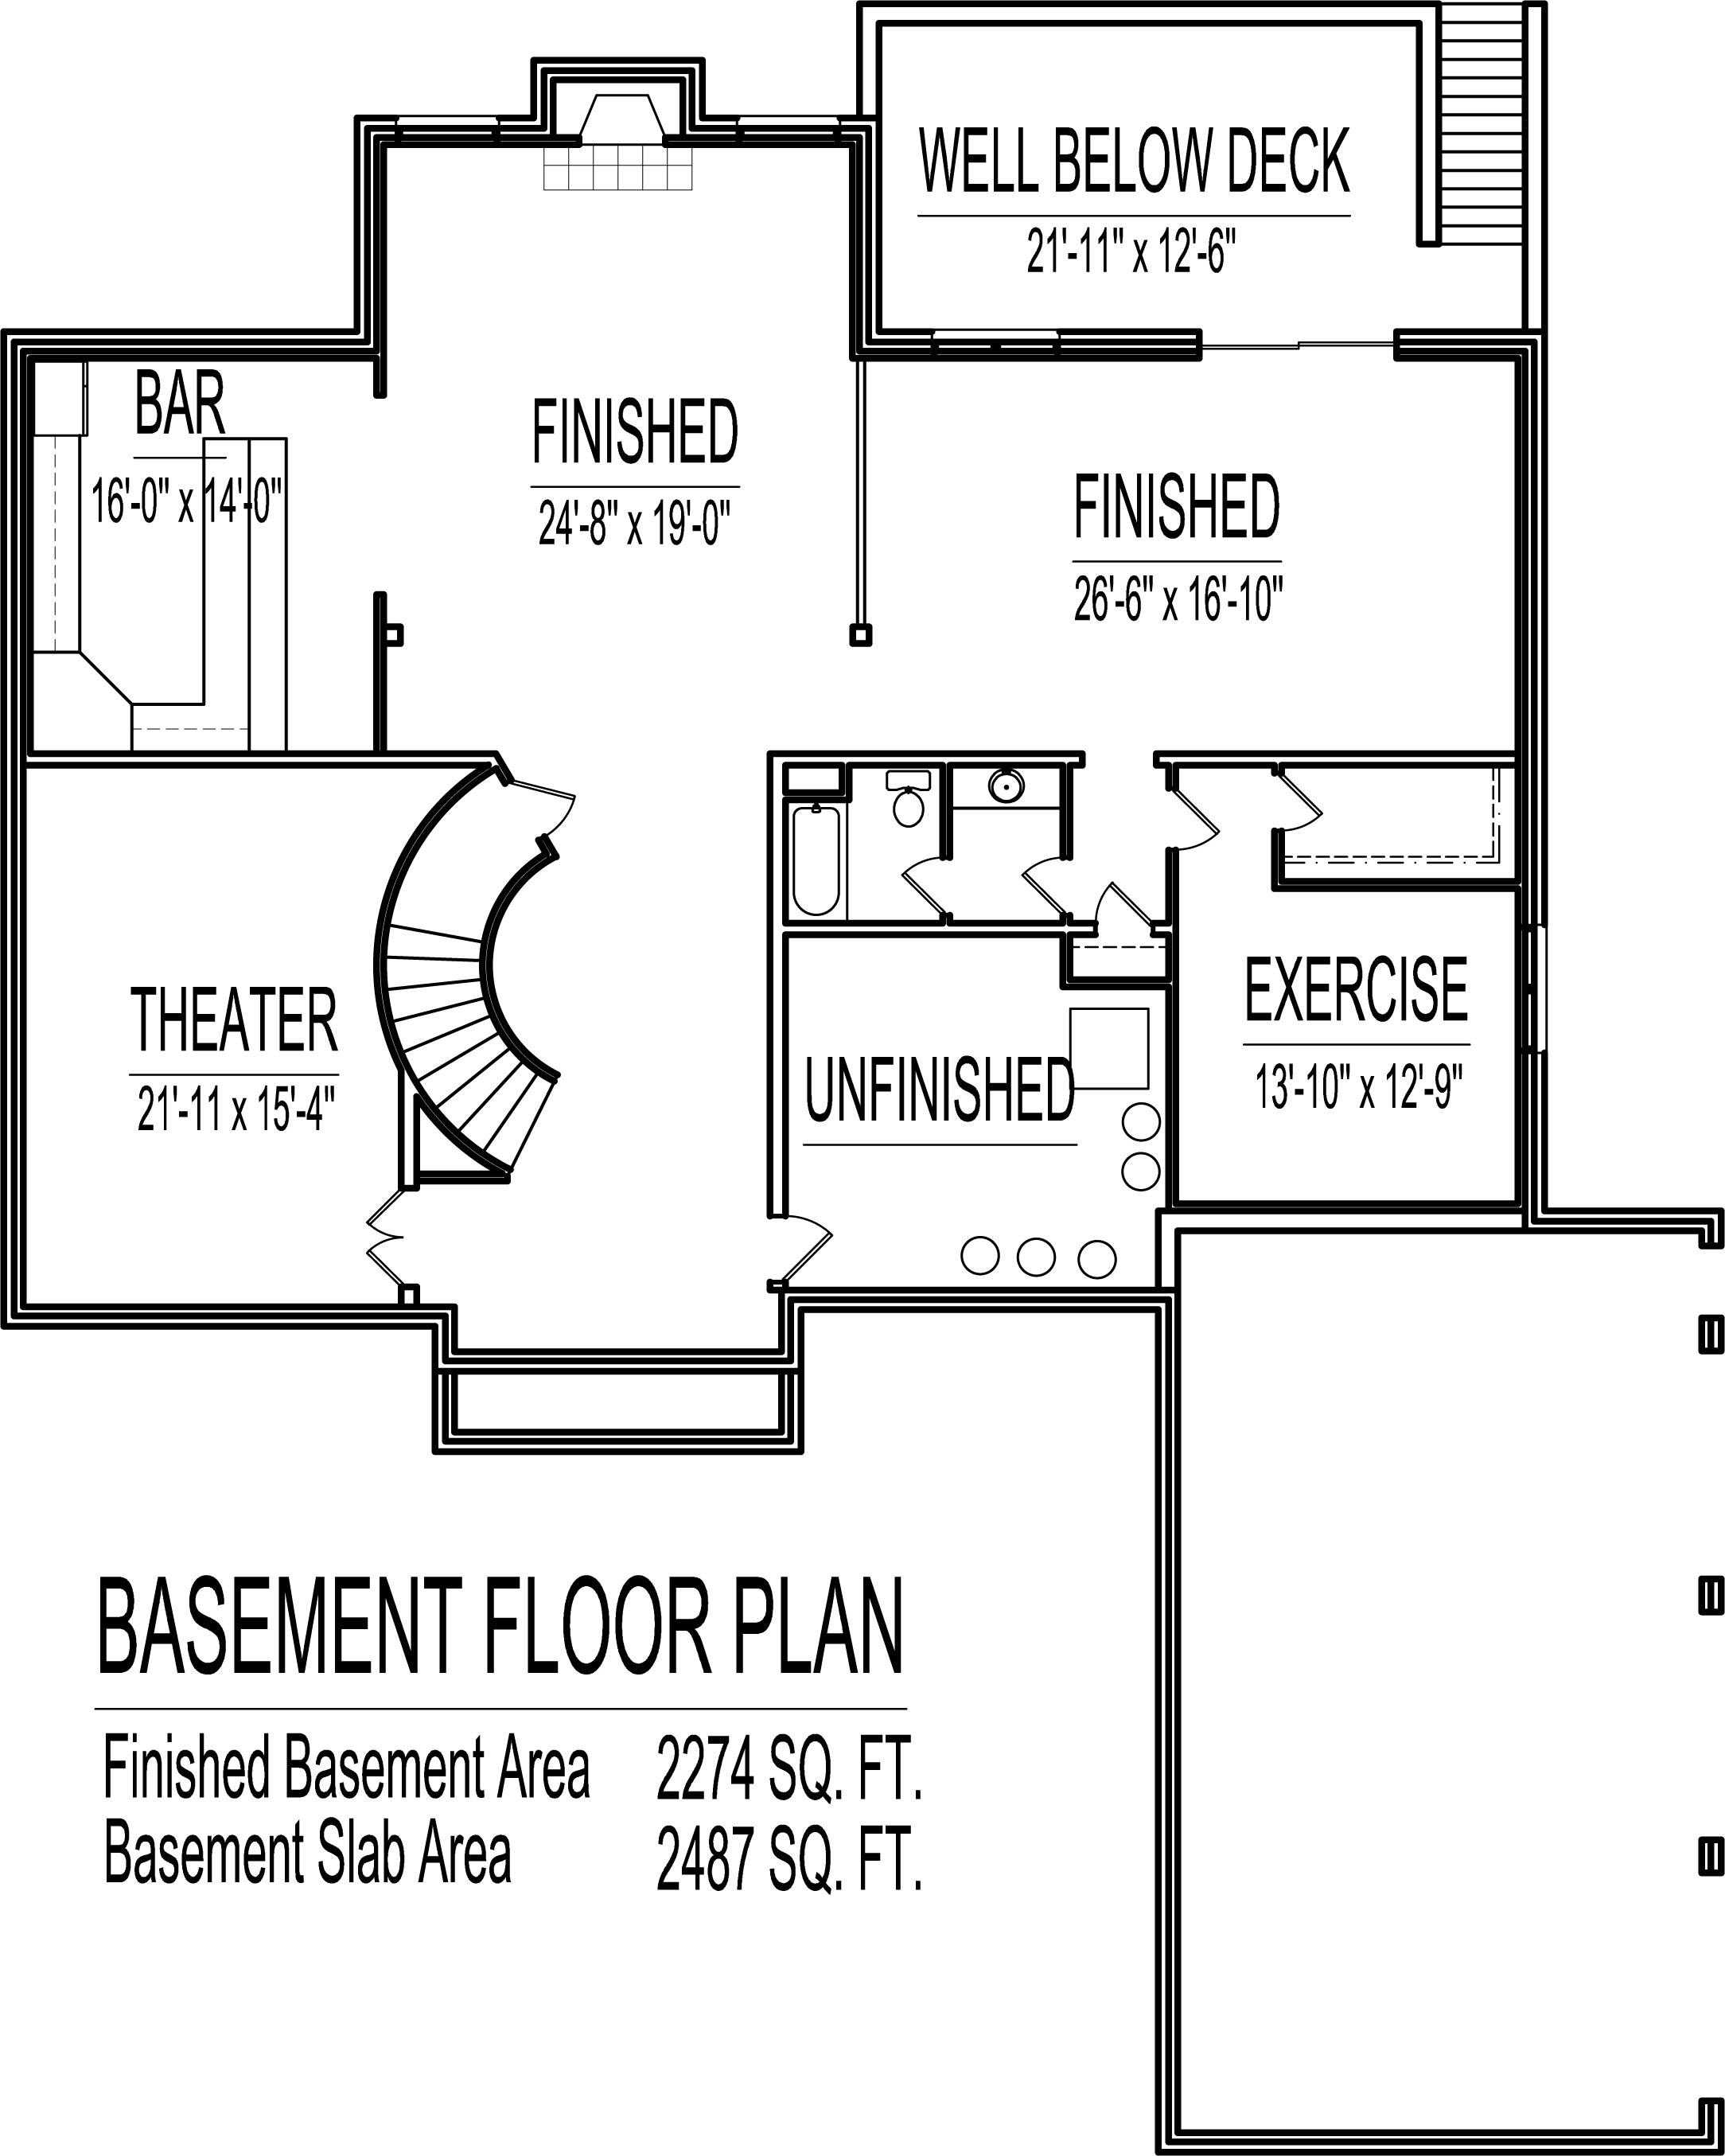 4500 Square Foot House Floor Plans 5 Bedroom 2 Story Double Stairs